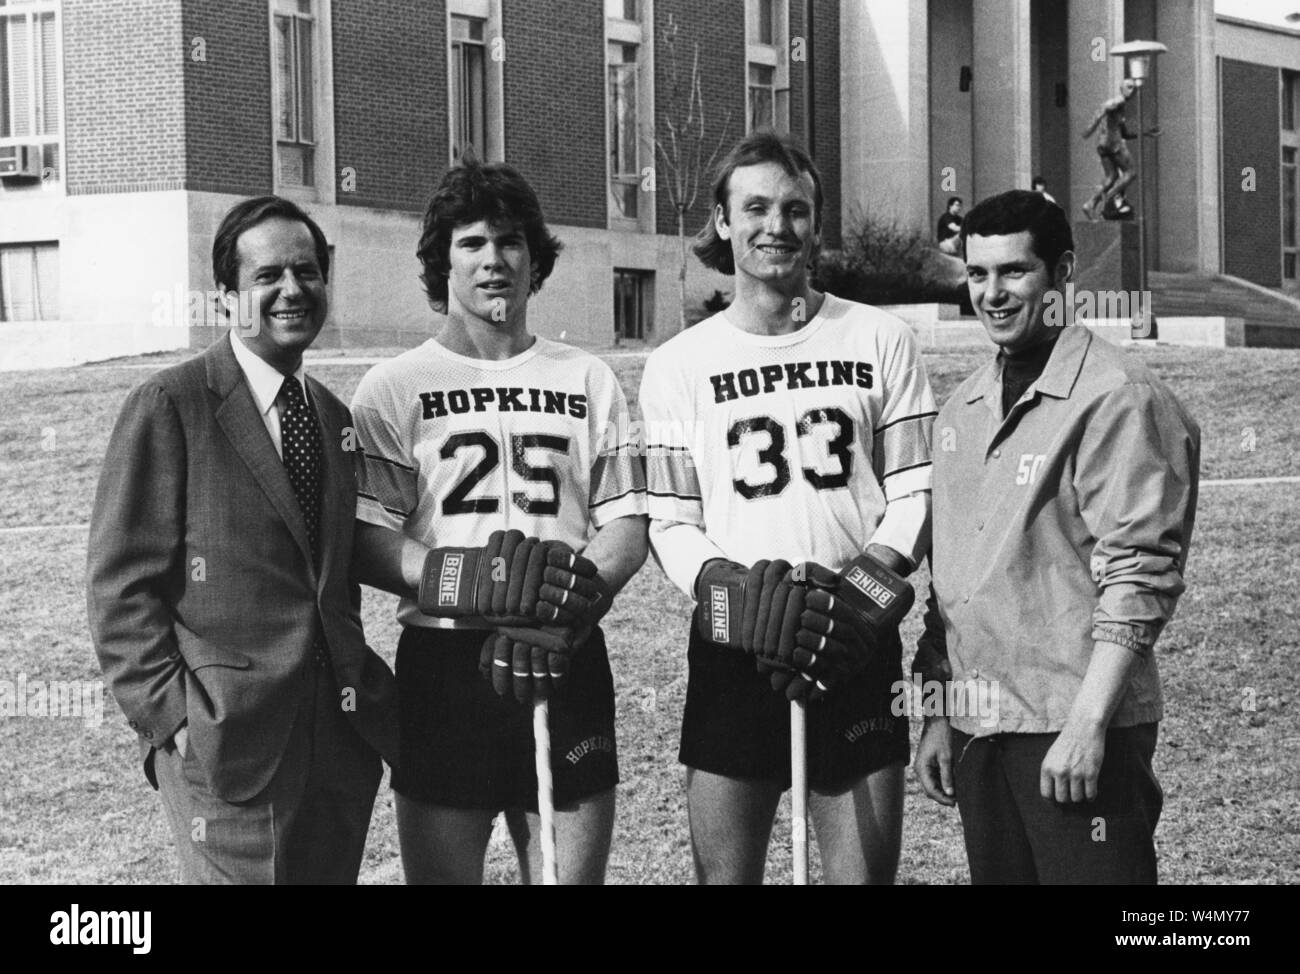 A portrait of President Steven Muller (far left) and Johns Hopkins University lacrosse coach Henry Ciccarone (far right) pose with two Hopkins lacrosse players in uniform wearing their gloves and holding their lacrosse sticks on campus at Johns Hopkins University, Baltimore, Maryland, 1976. From the Historical Photographs Collection. () Stock Photo